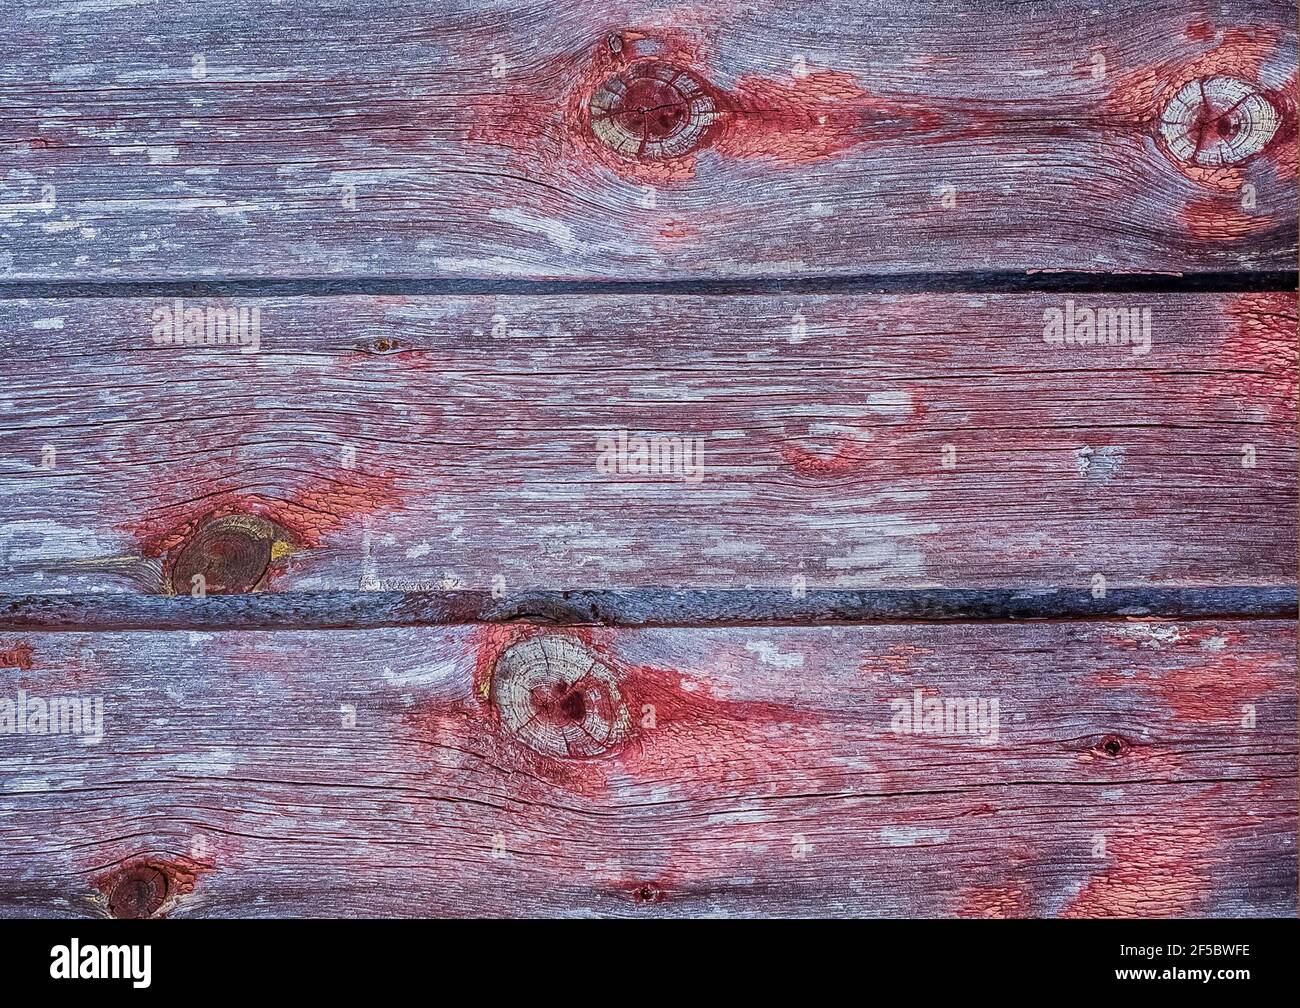 Purple texture of an old wooden fence with abstract pattern, background board. Stock Photo